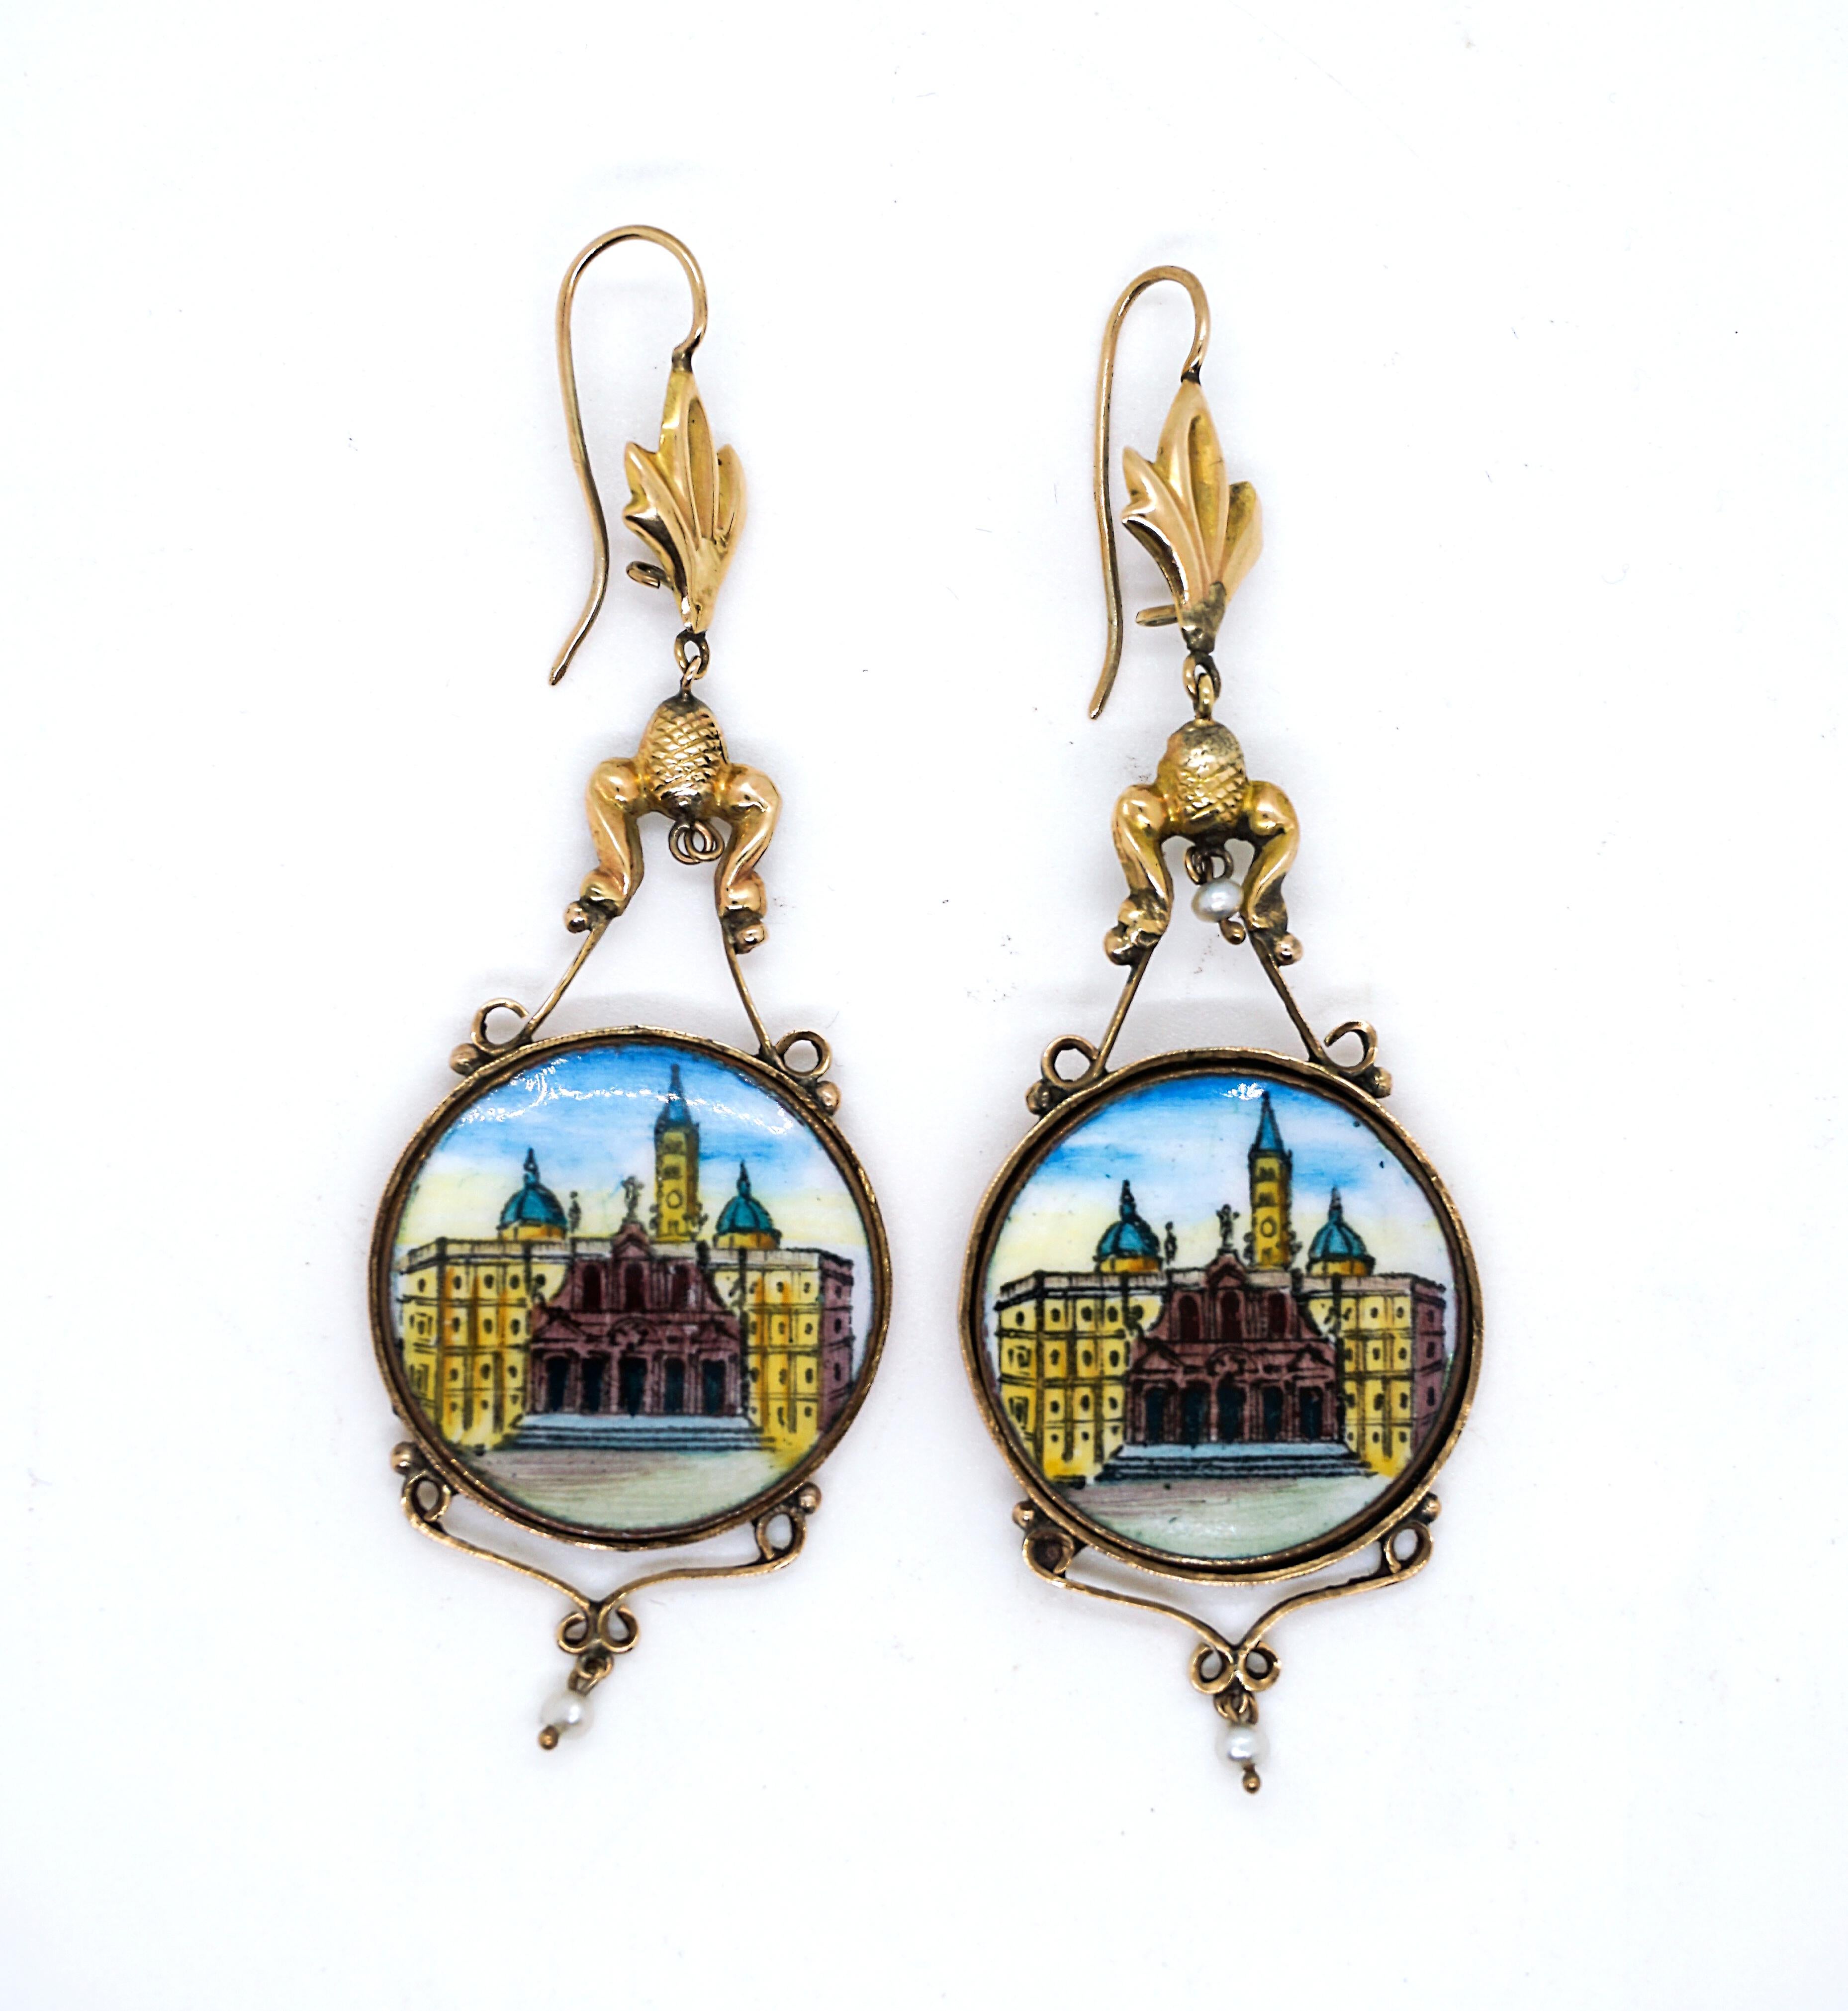 Art Nouveau Golden Drop-shaped Earrings With Enamel Painted Veduta, Italy Around 1890 For Sale